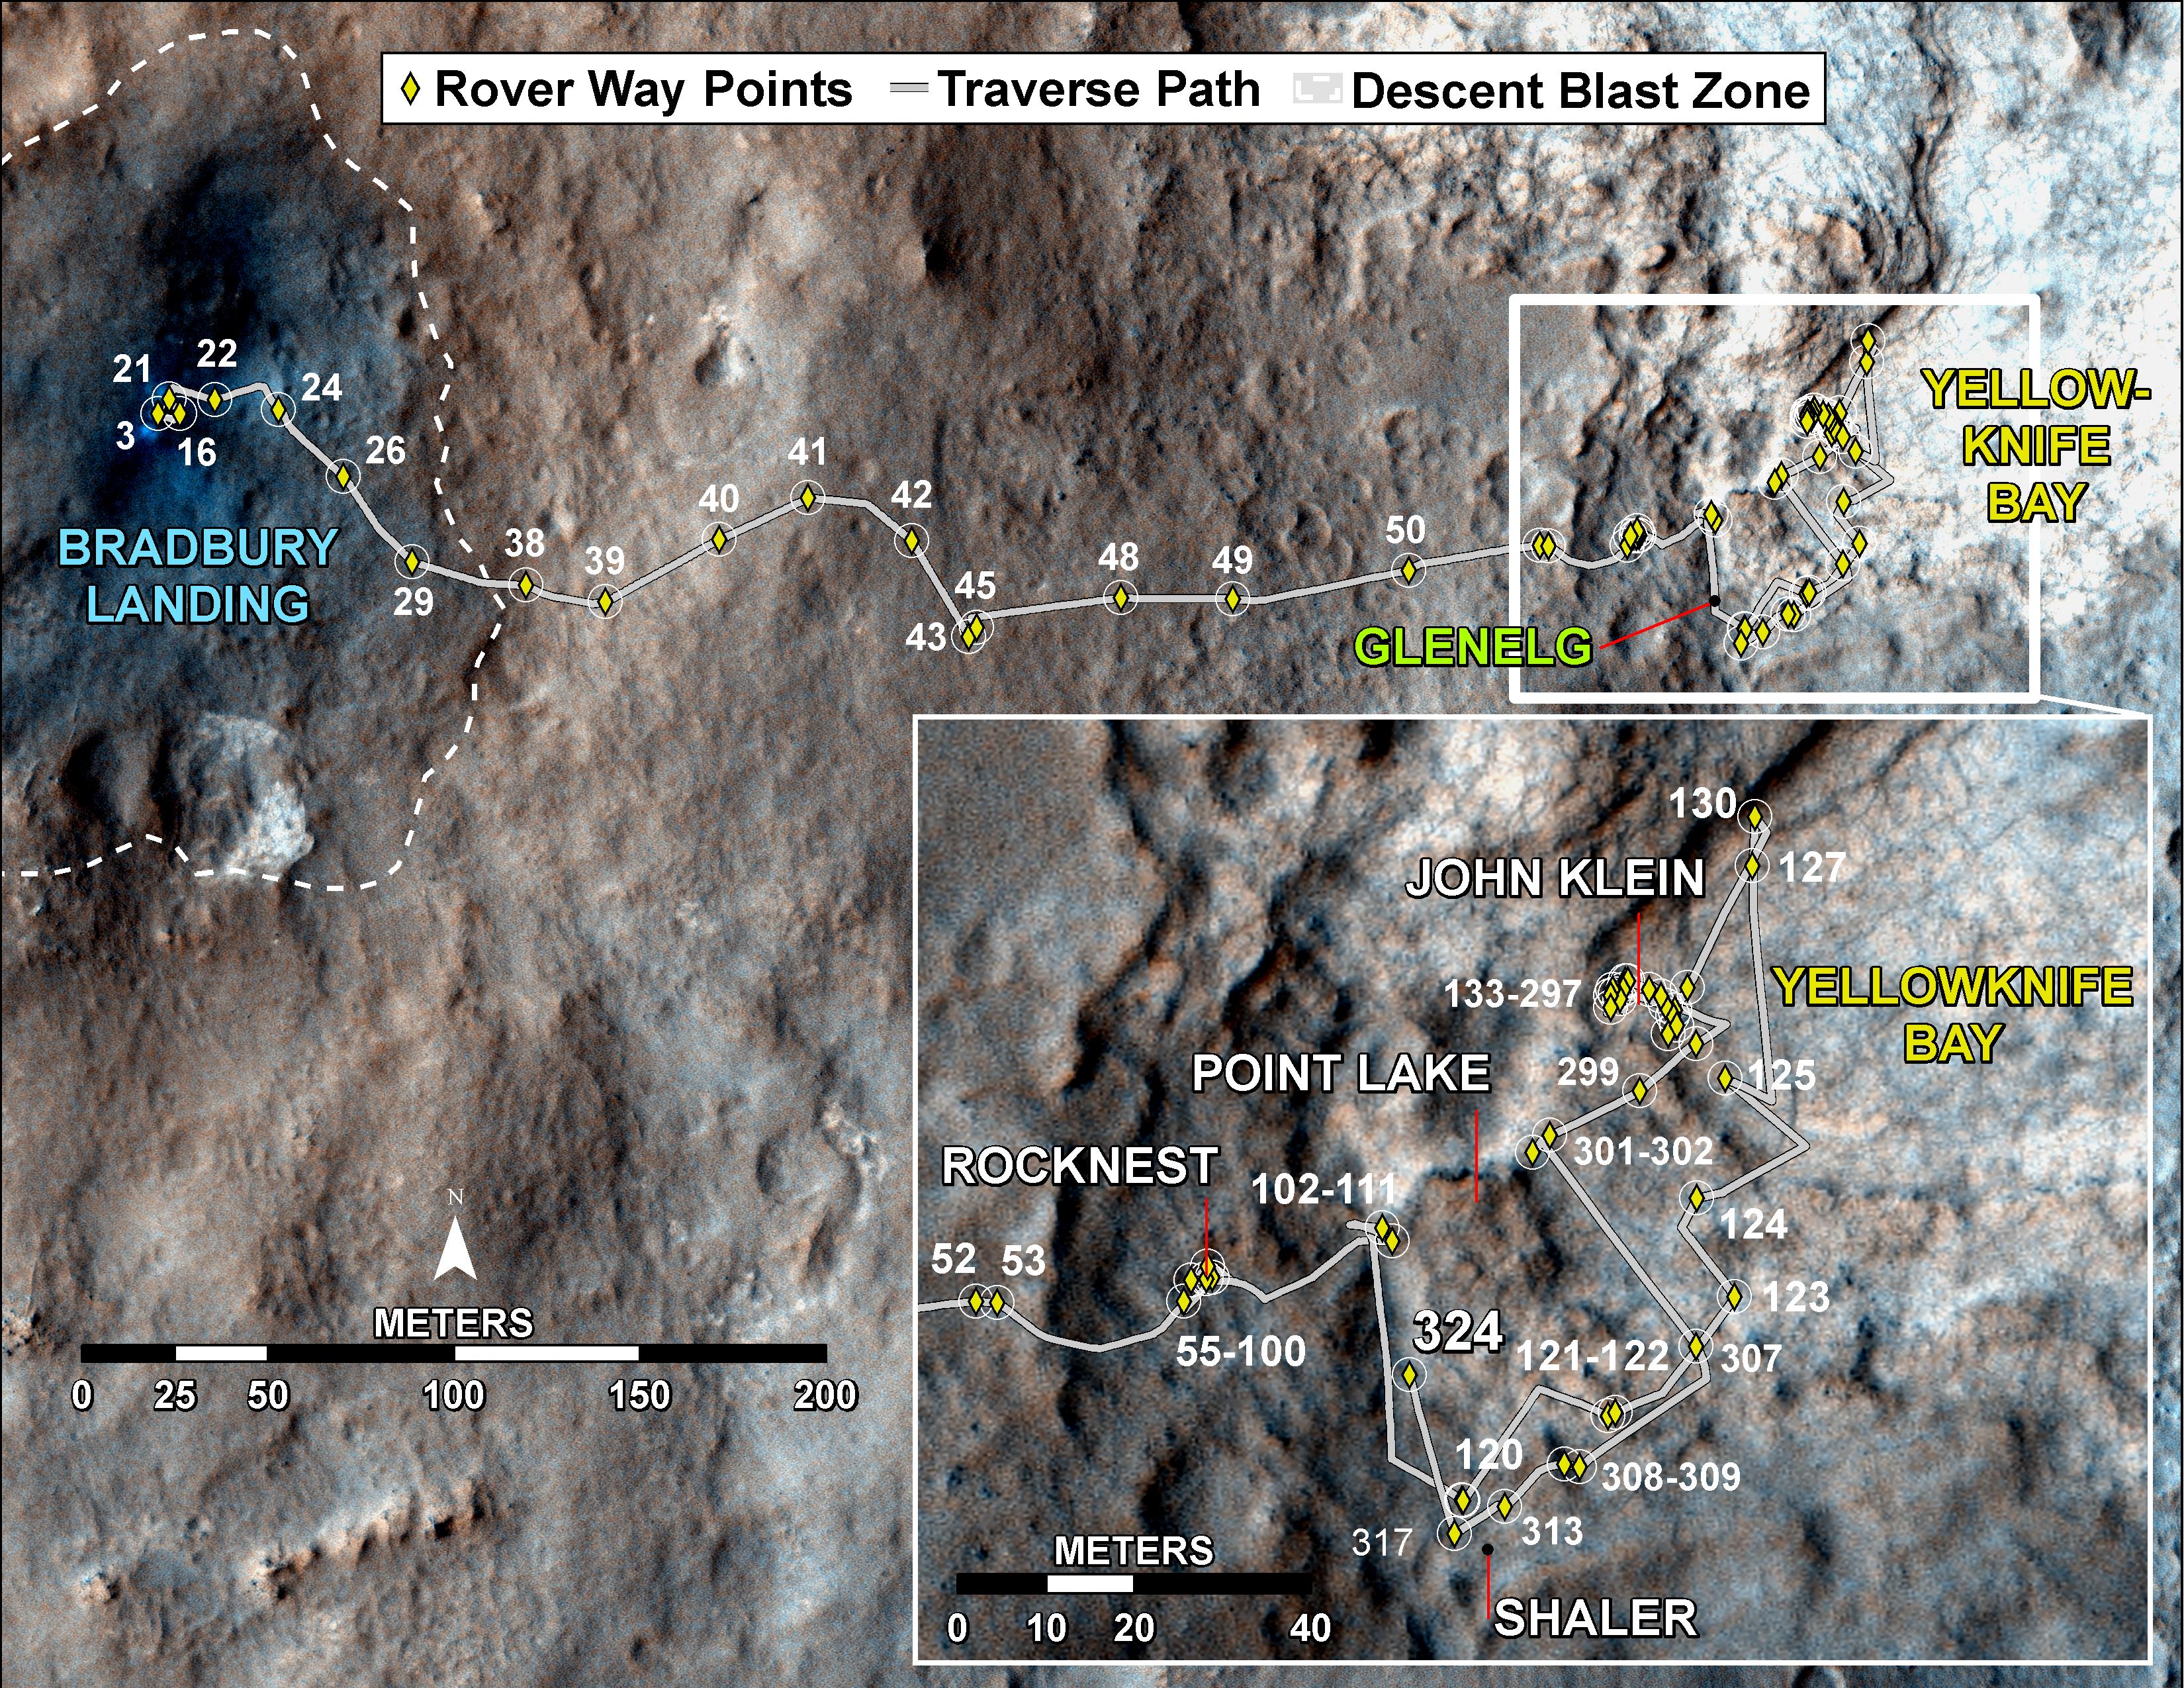 mars rover travel map